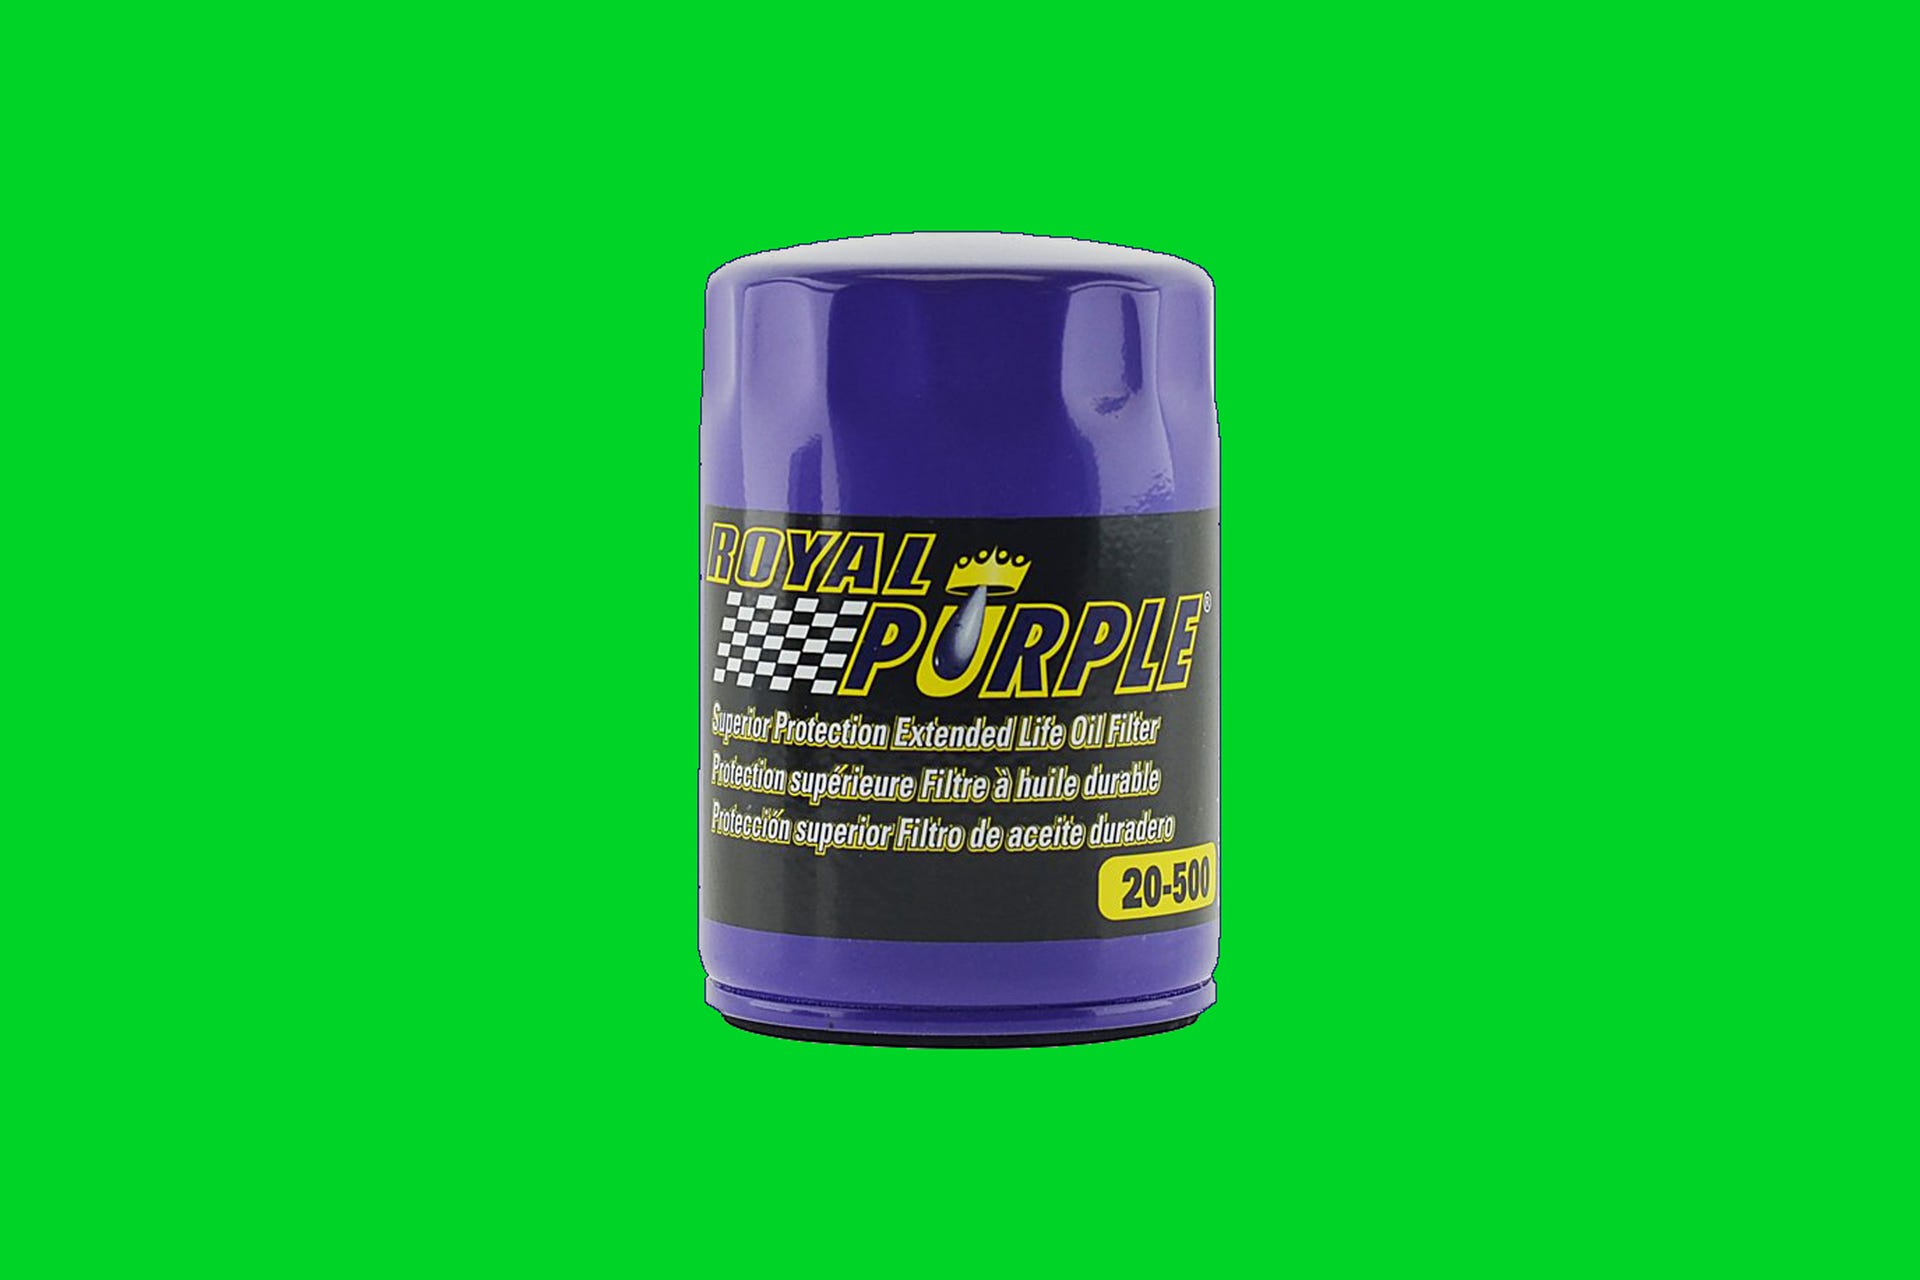 Royal Purple Extended Life Premium Oil Filter on a green background